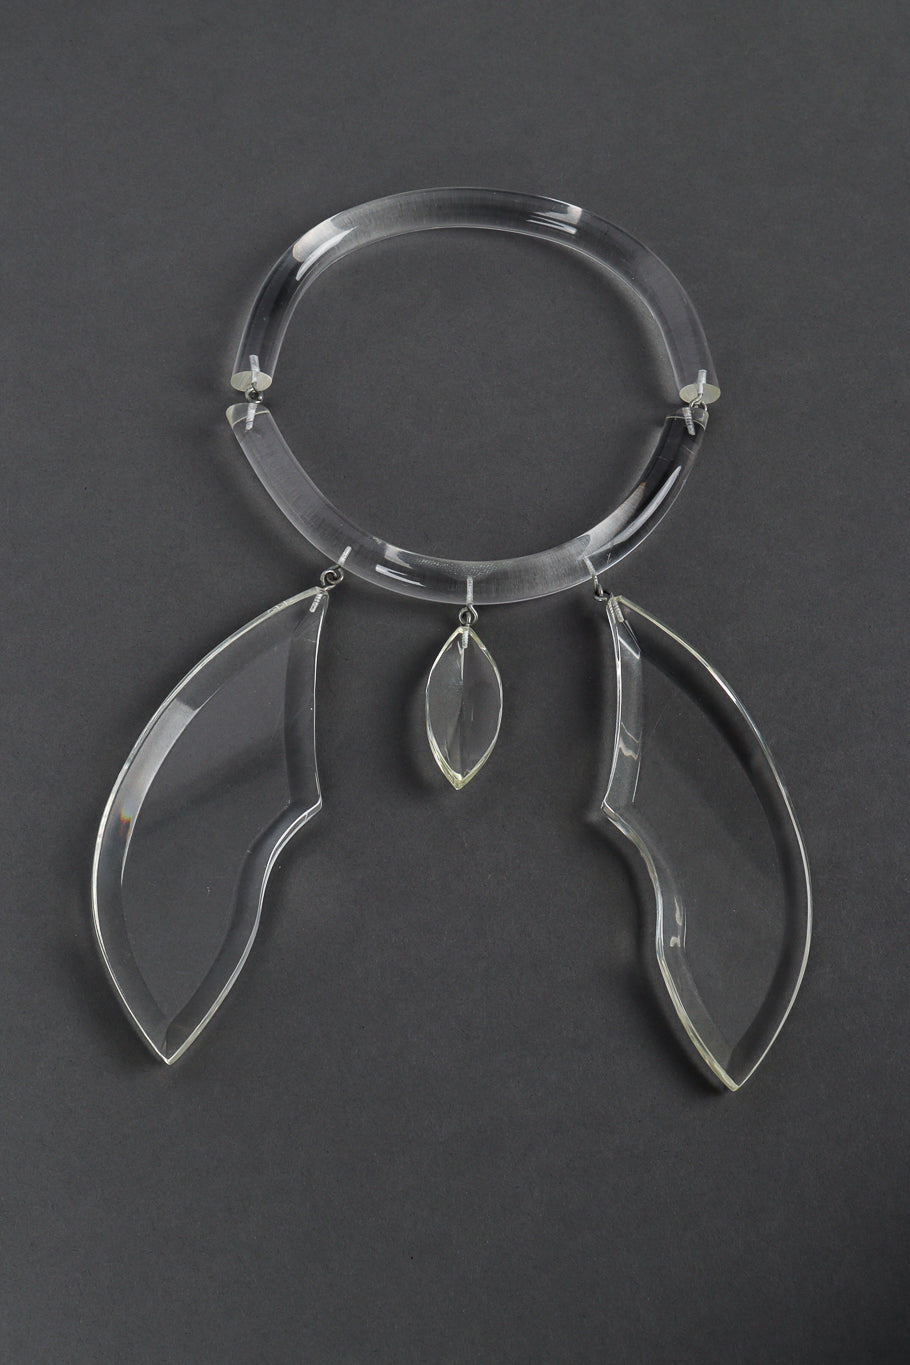 Lucite Wing Necklace by Judith Hendler on greay paper @recess LA